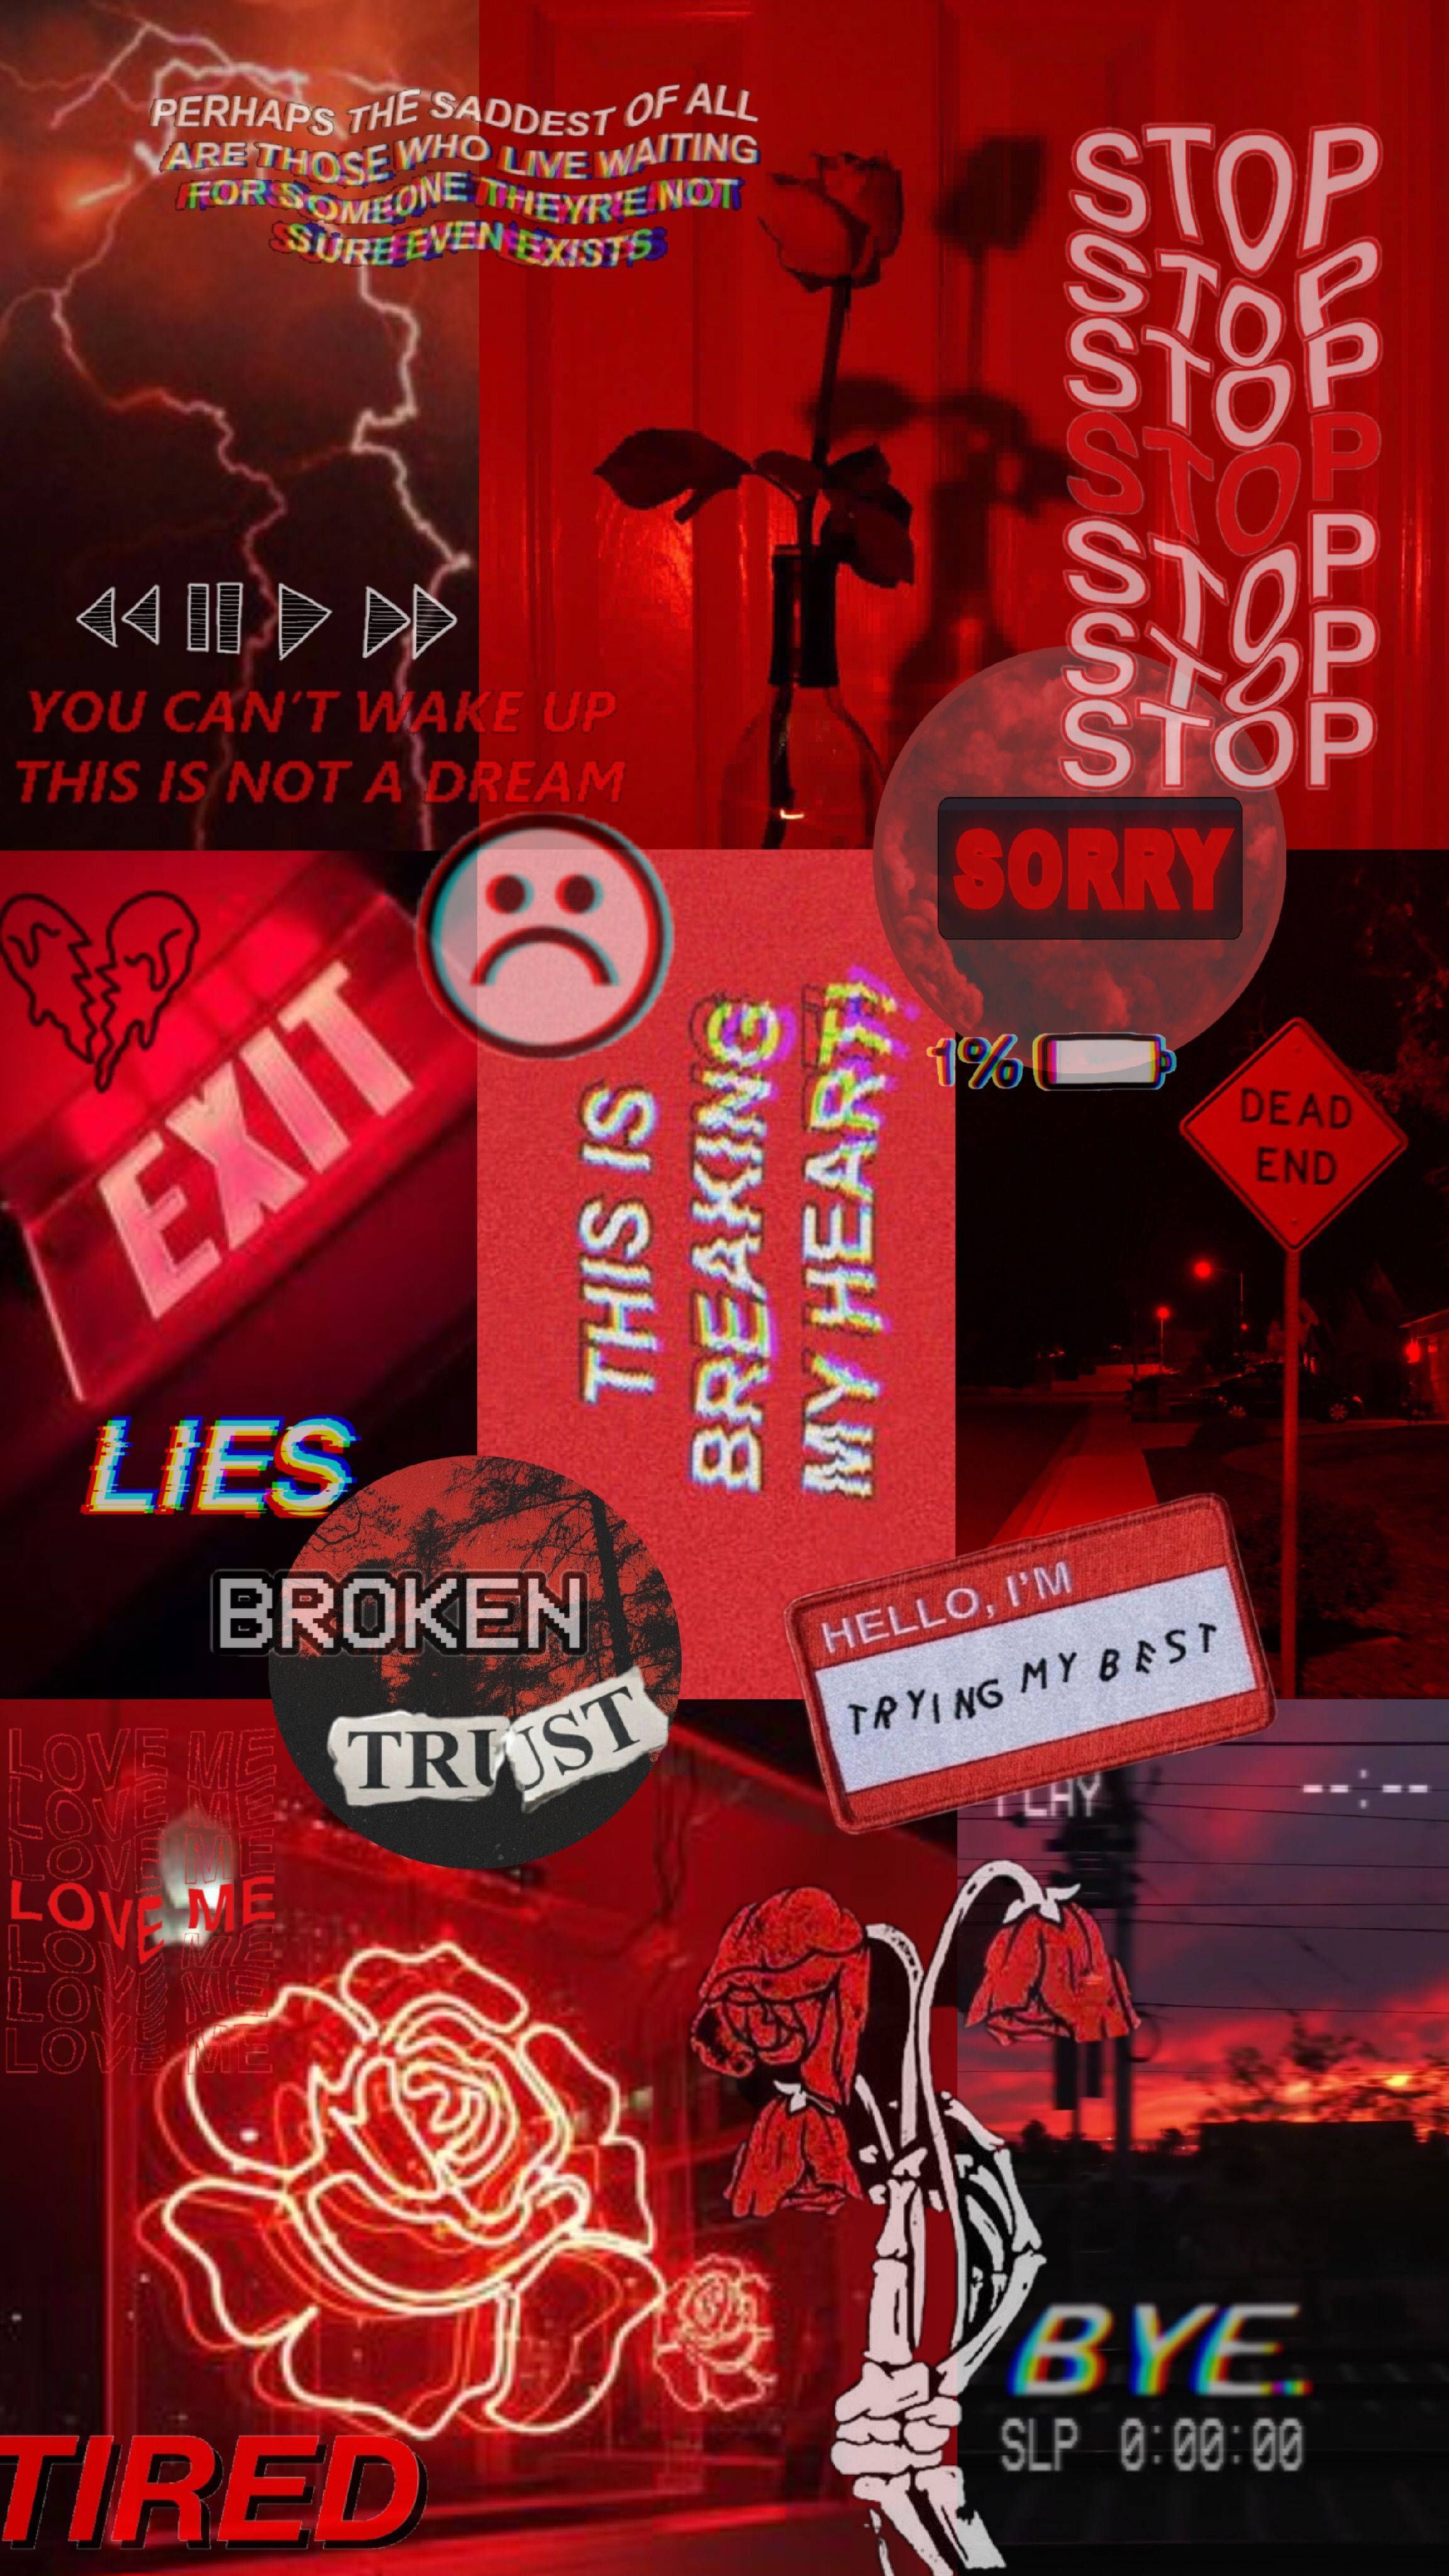 Red aesthetic wallpaper for phone or desktop, with a mix of red and black emojis, roses, broken trust, sorry, broken heart, and more. - Red, dark red, iPhone red